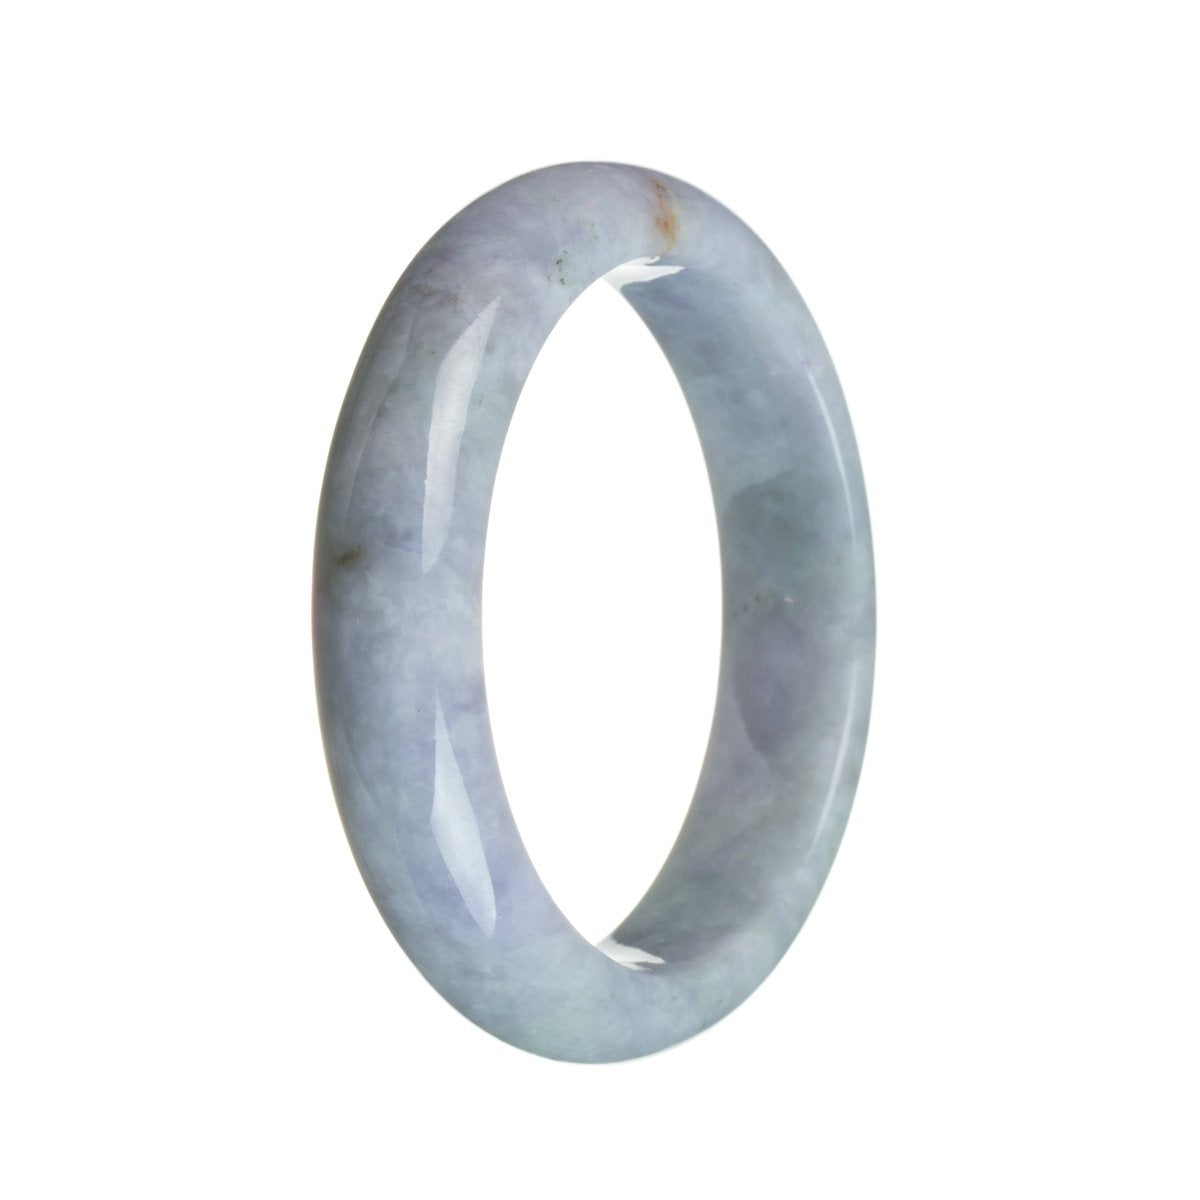 A close-up photo of a lavender-colored Burmese jade bangle. The bangle is round and has a smooth surface. It is certified as Grade A and has a strong lavender hue. The bangle measures 58mm in diameter and is sold by MAYS.